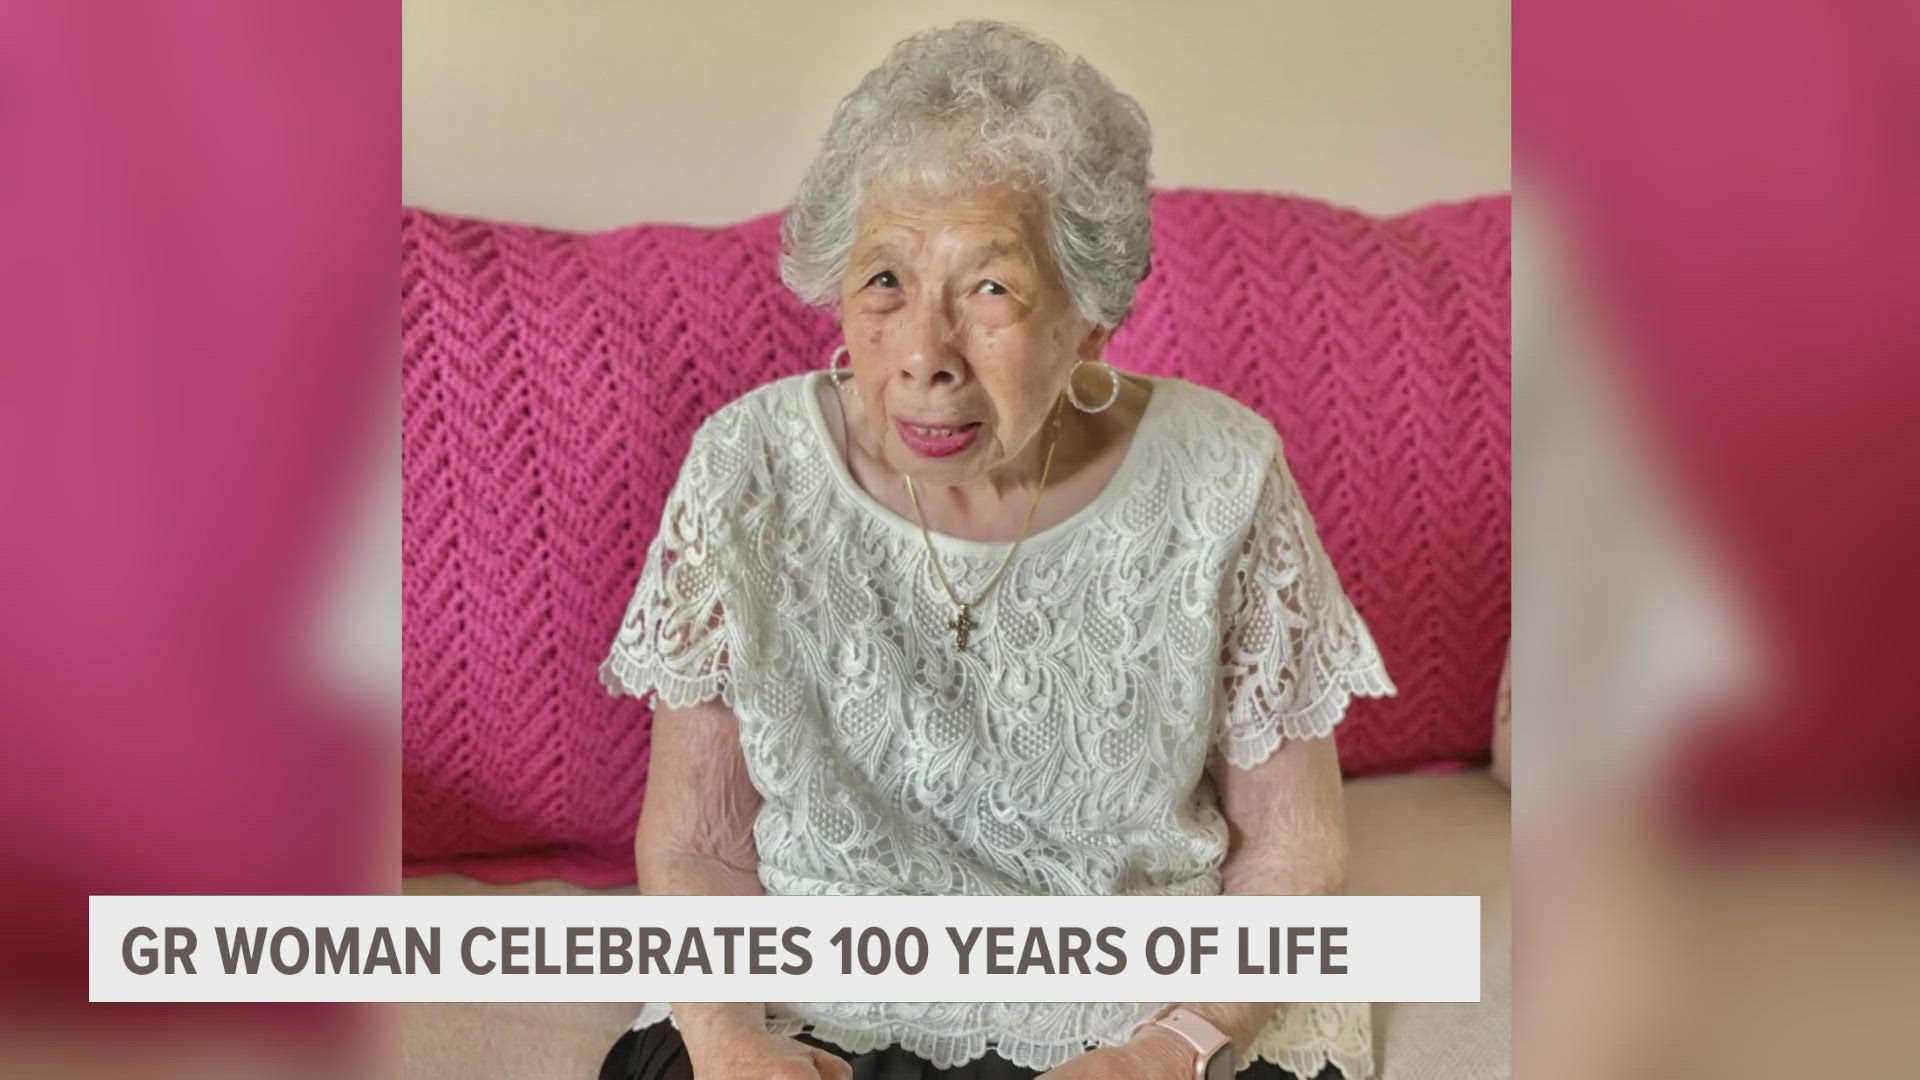 After 100 years, a West Michigan woman says she's just getting started. Dorsie Lee of Grand Rapids is celebrating a century today!